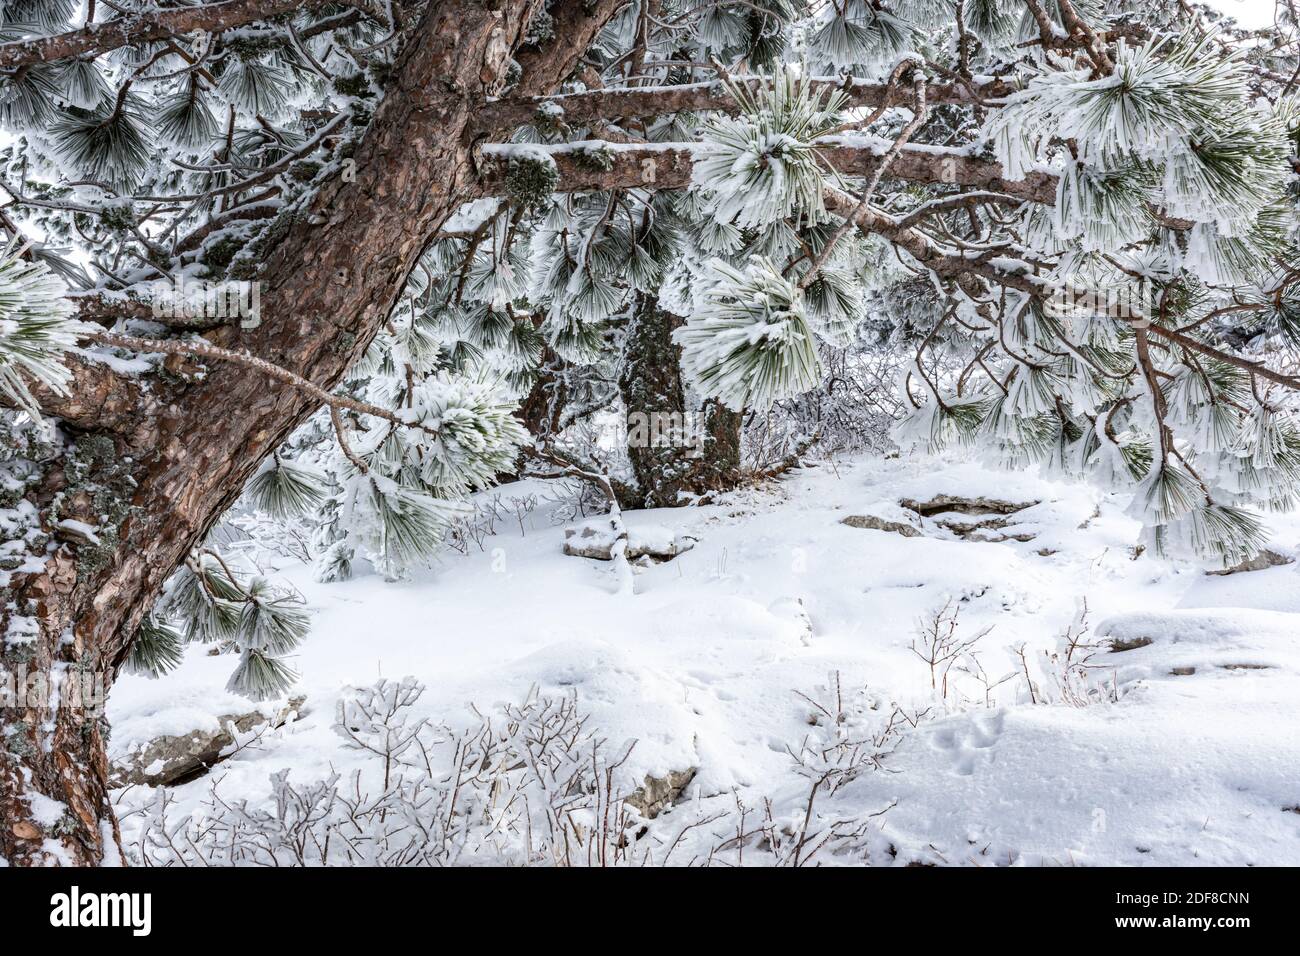 Snow covered evergreen branches, Snow on our evergreen tree…